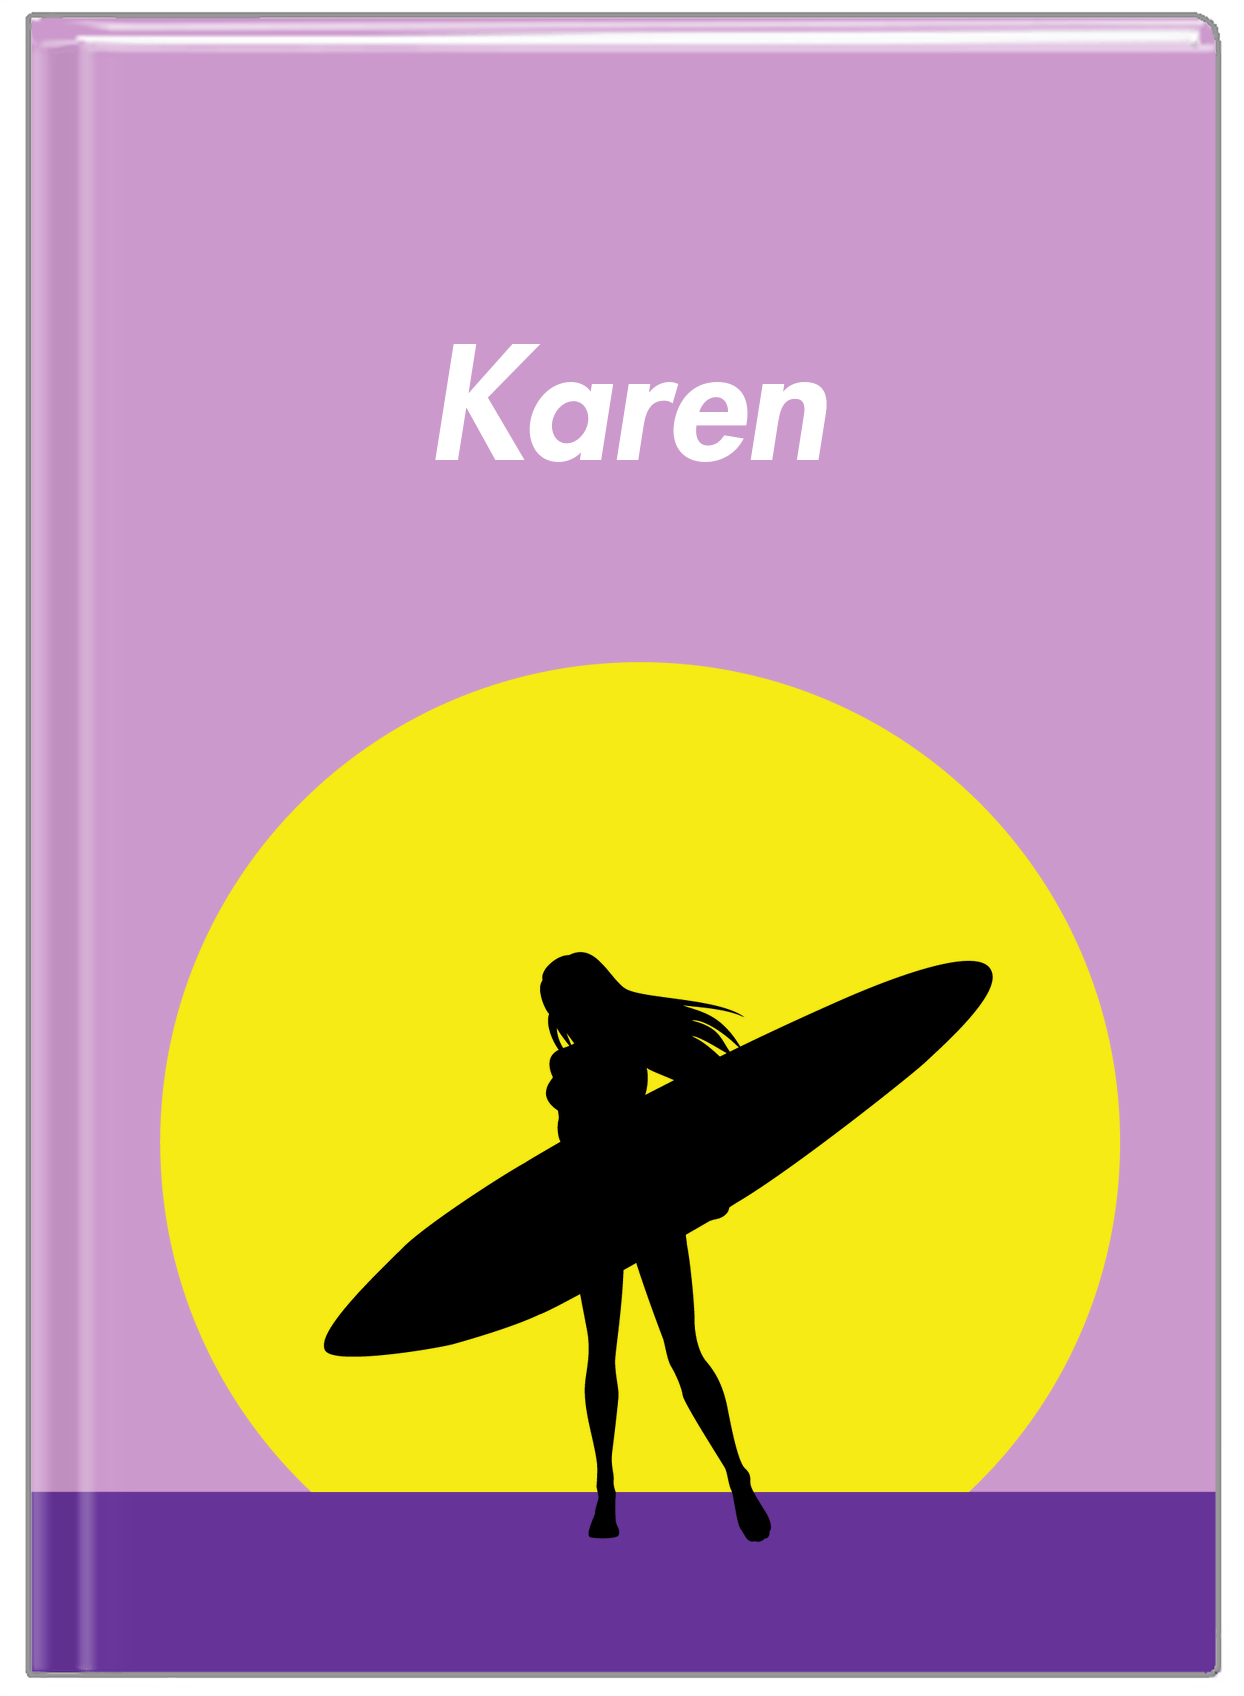 Personalized Surfing Journal III - Surfer Silhouette IV - Front View